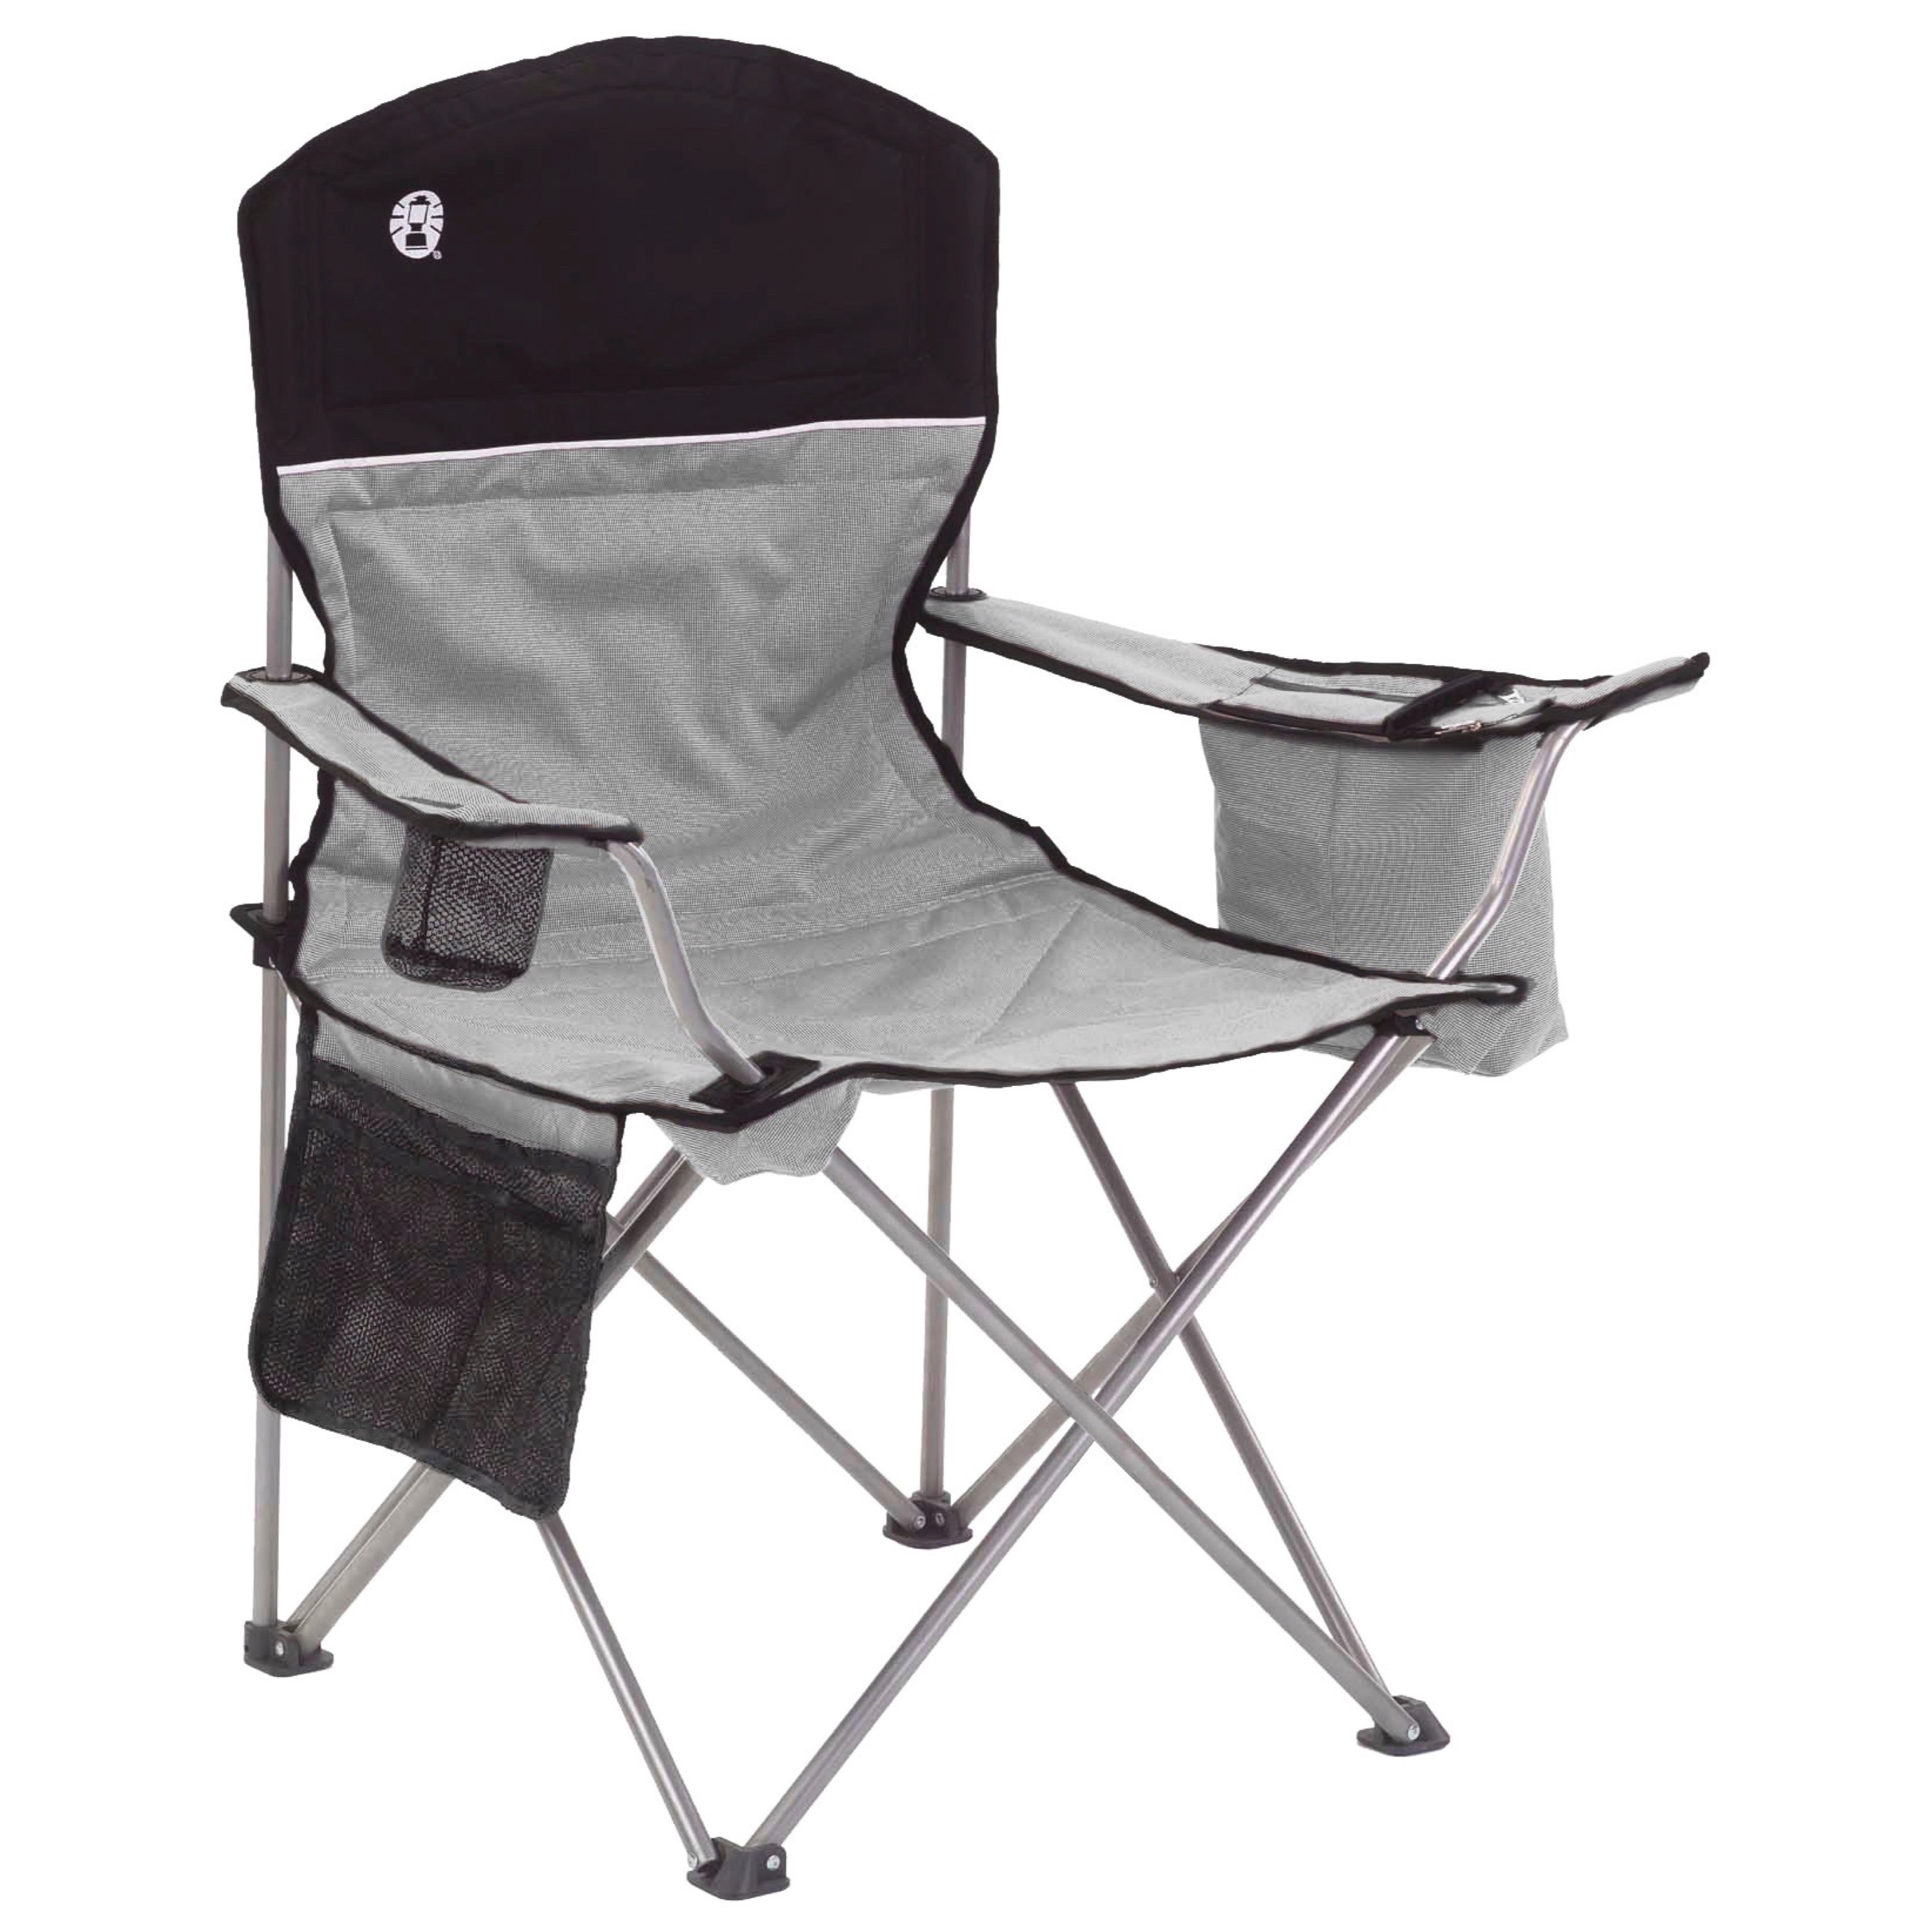 Coleman Portable Camping Quad Chair with 4-Can Cooler, Adult - image 1 of 4